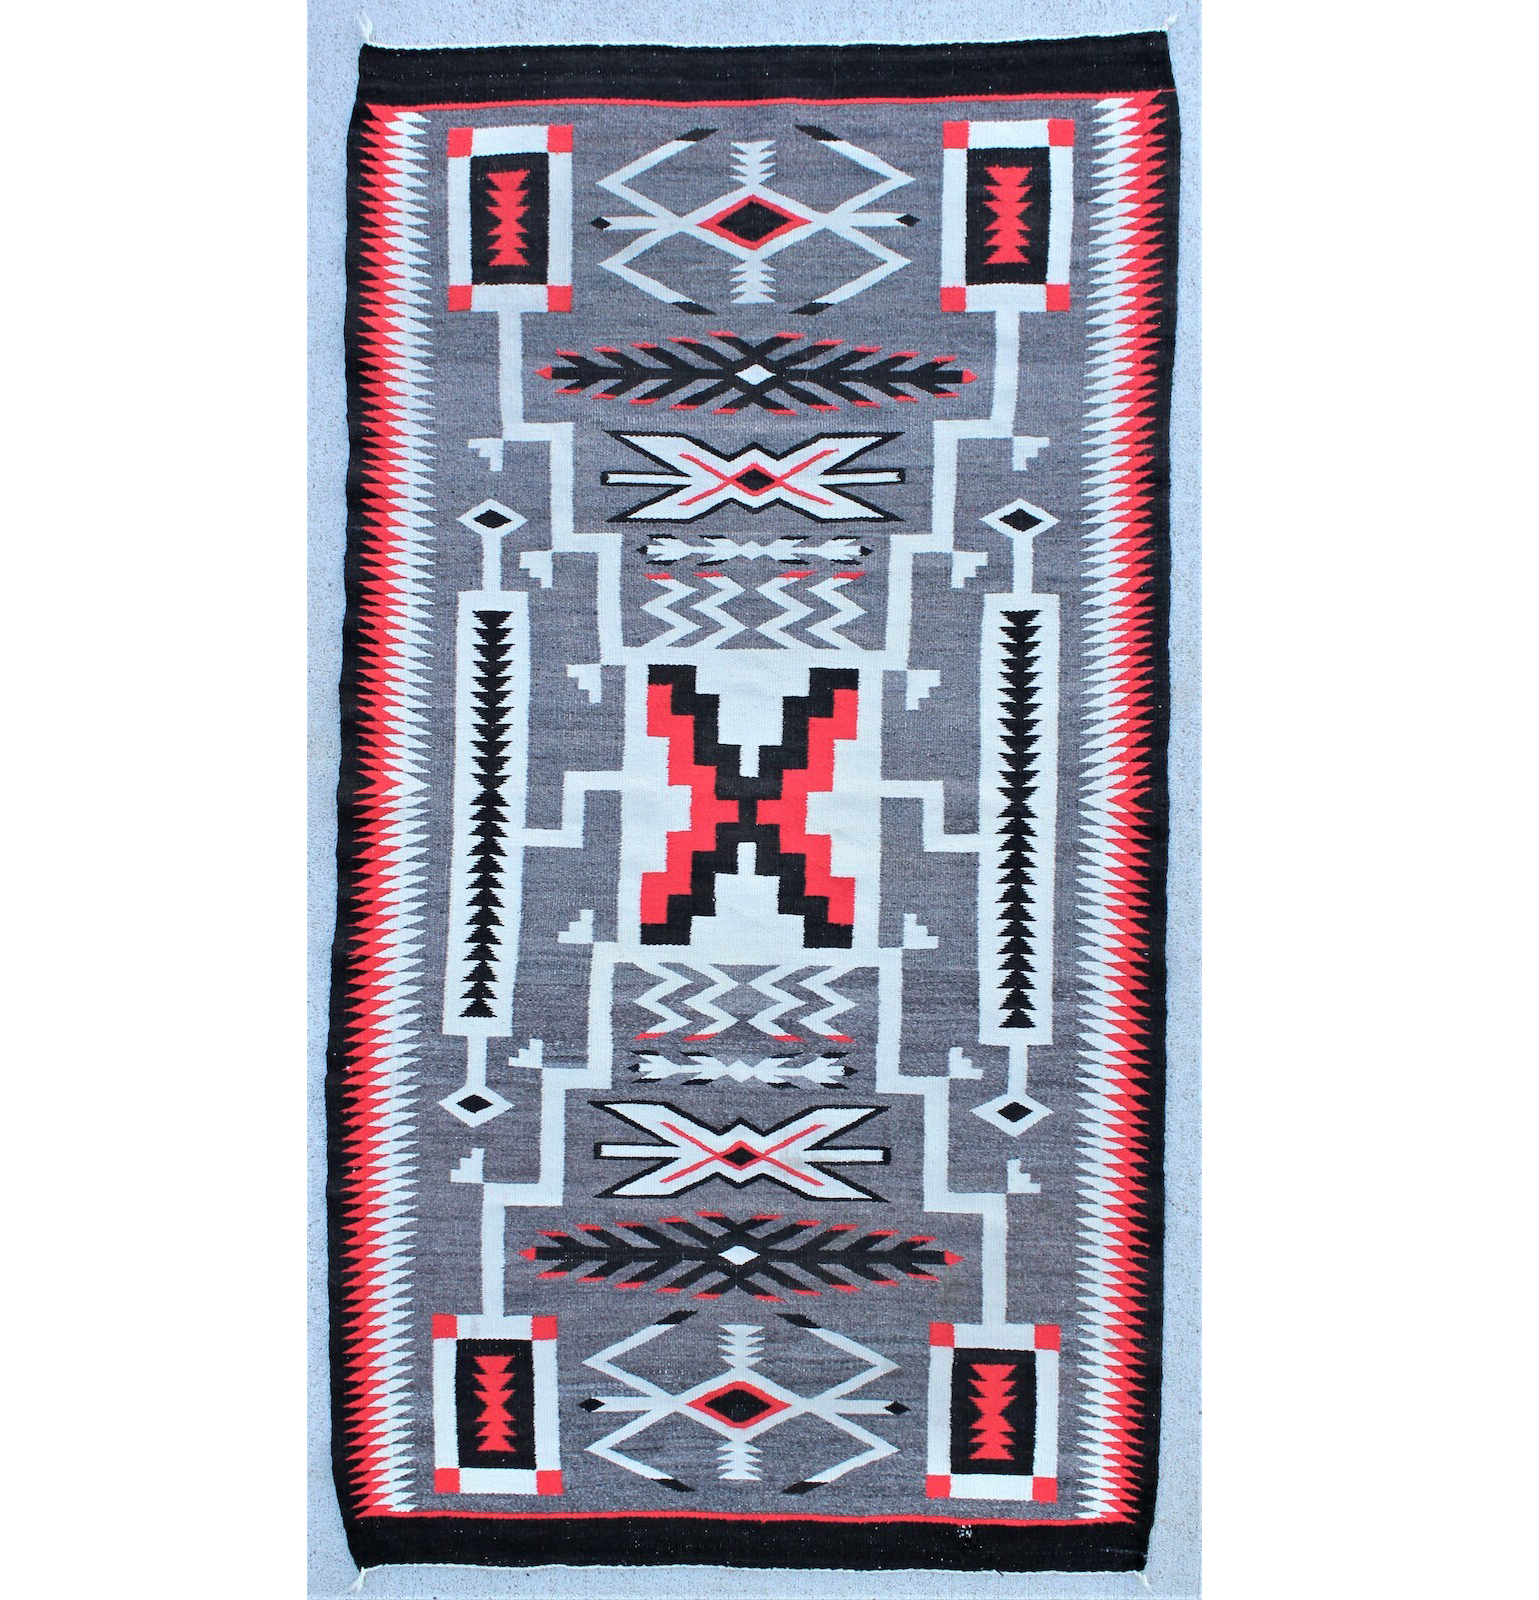 Extremely clean and colorful Navajo Crystal Storm weaving from the Four Corners region with J.B. Moore pattern incorporating waterbugs. Vivid red, black, white and gray motif, 33in x 61in, est. $1,200-$1,800